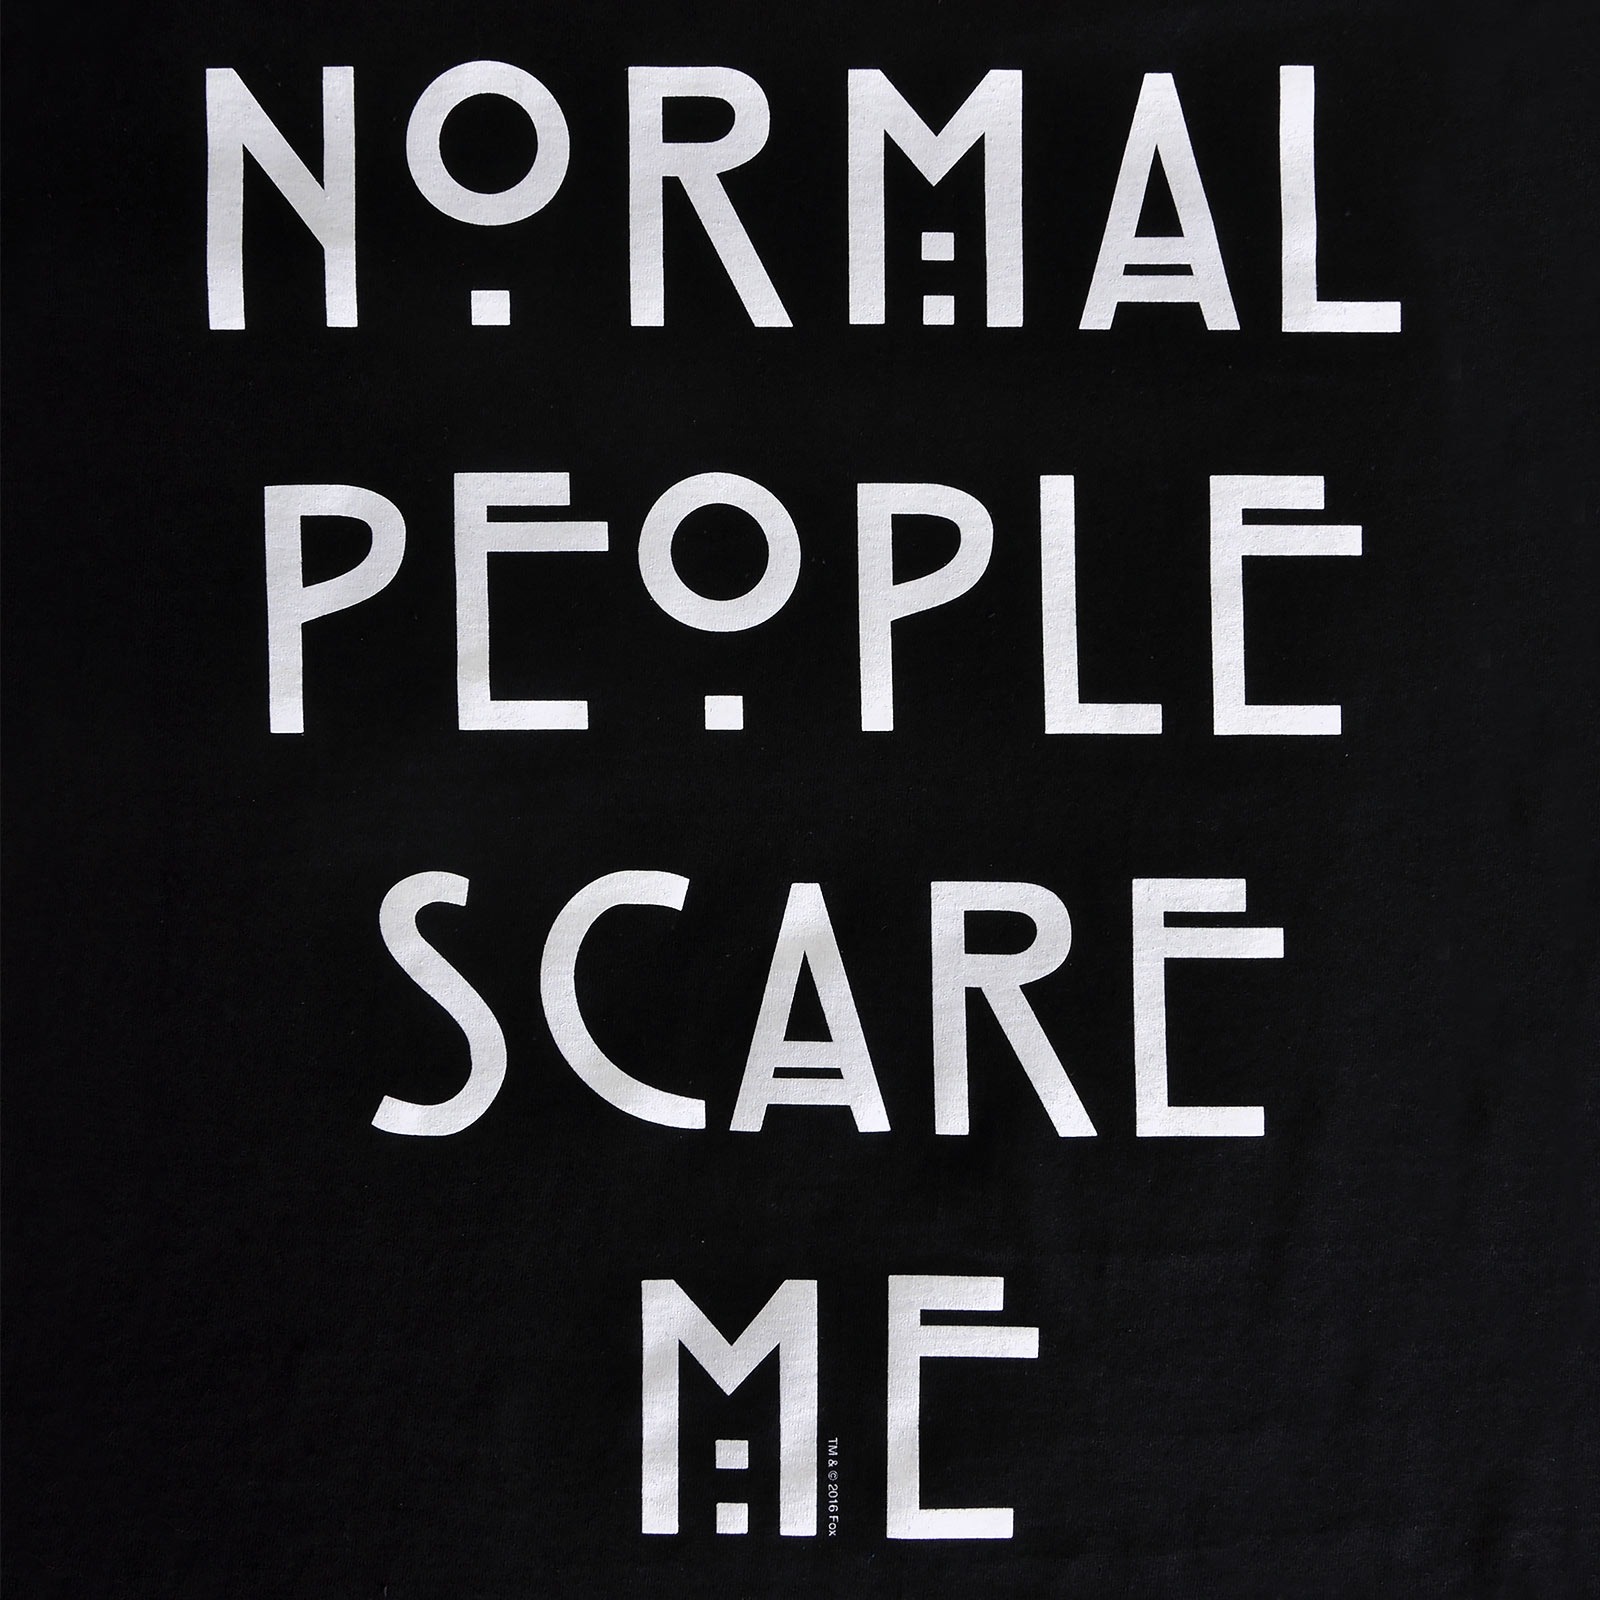 American Horror Story - T-shirt Normal People Scare Me